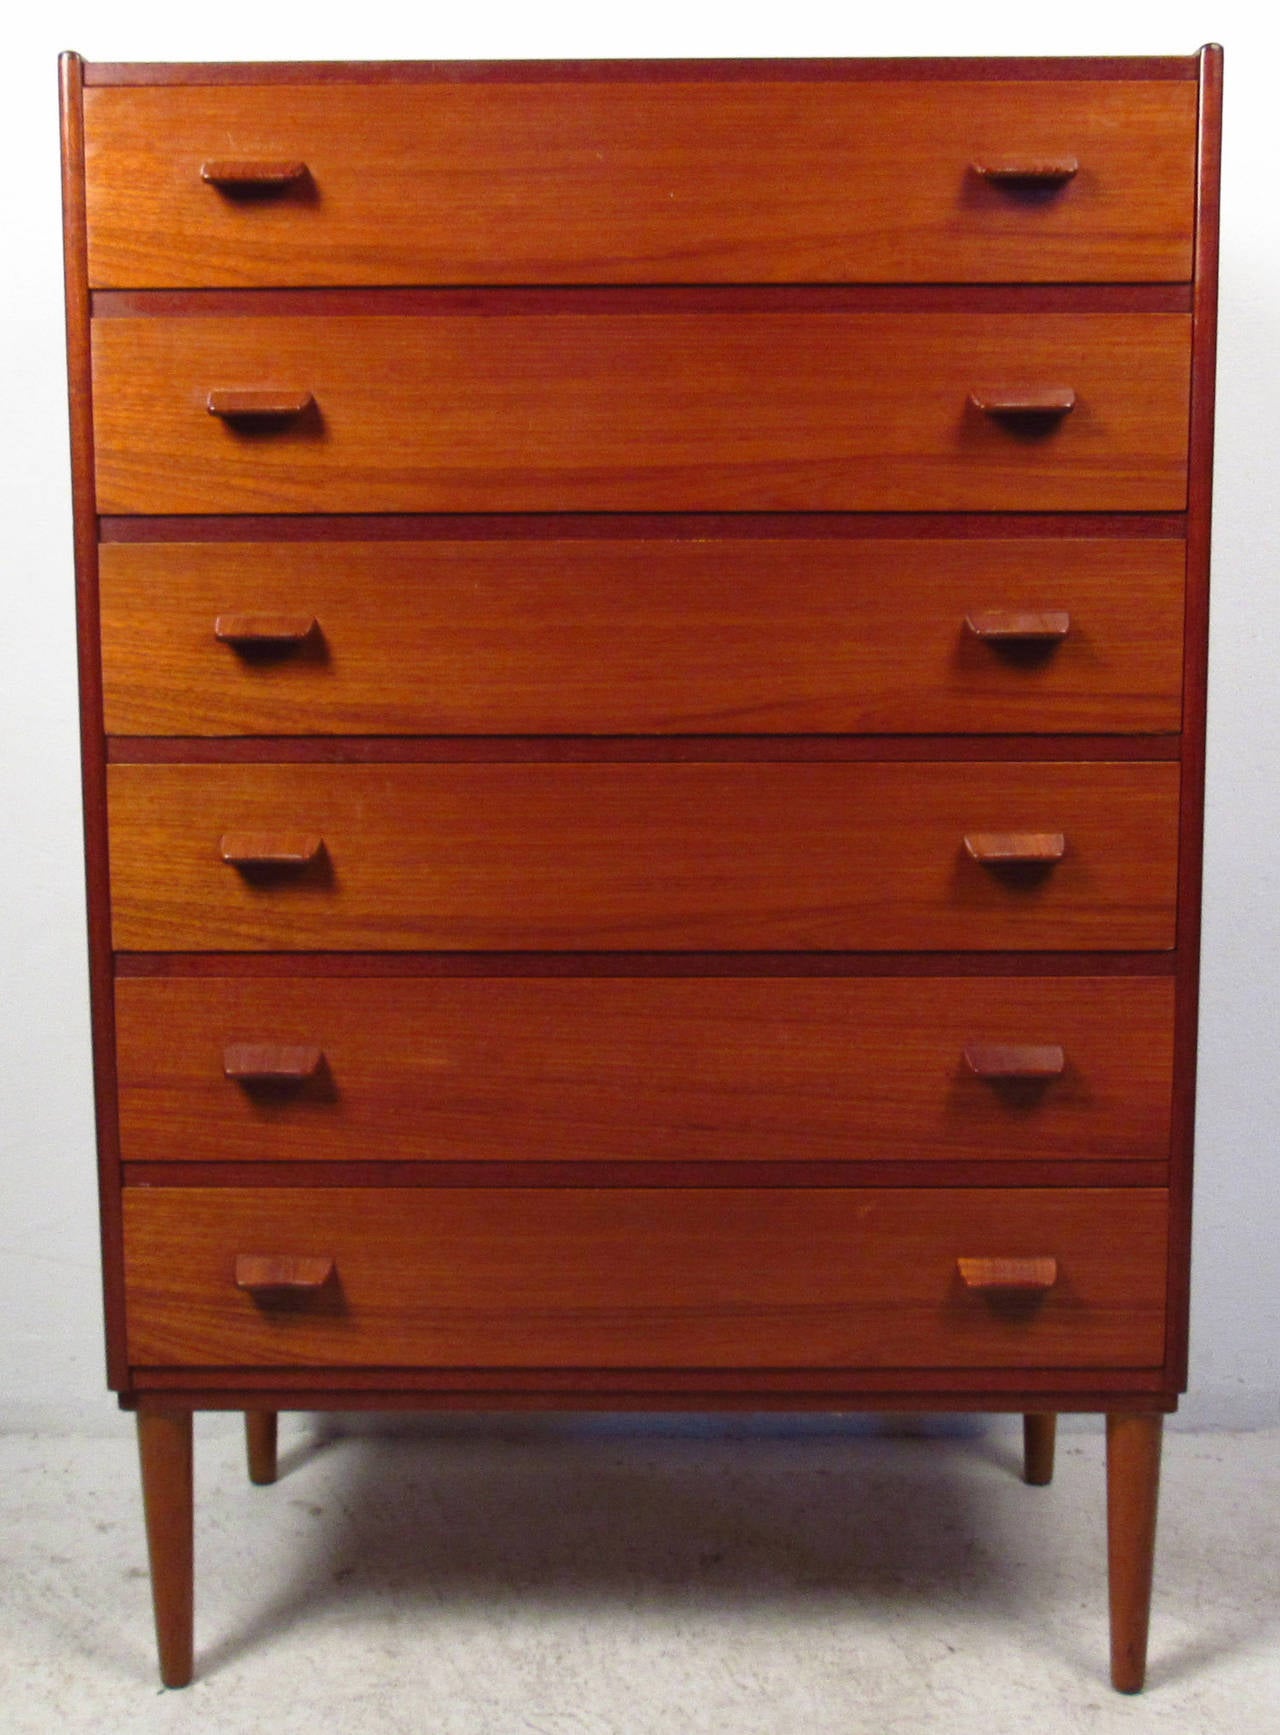 Vintage-modern Danish highboy dresser features six drawers with sculpted handles and beautiful teak grain. Designed by Poul Volther.

Please confirm item location NY or NJ with dealer.